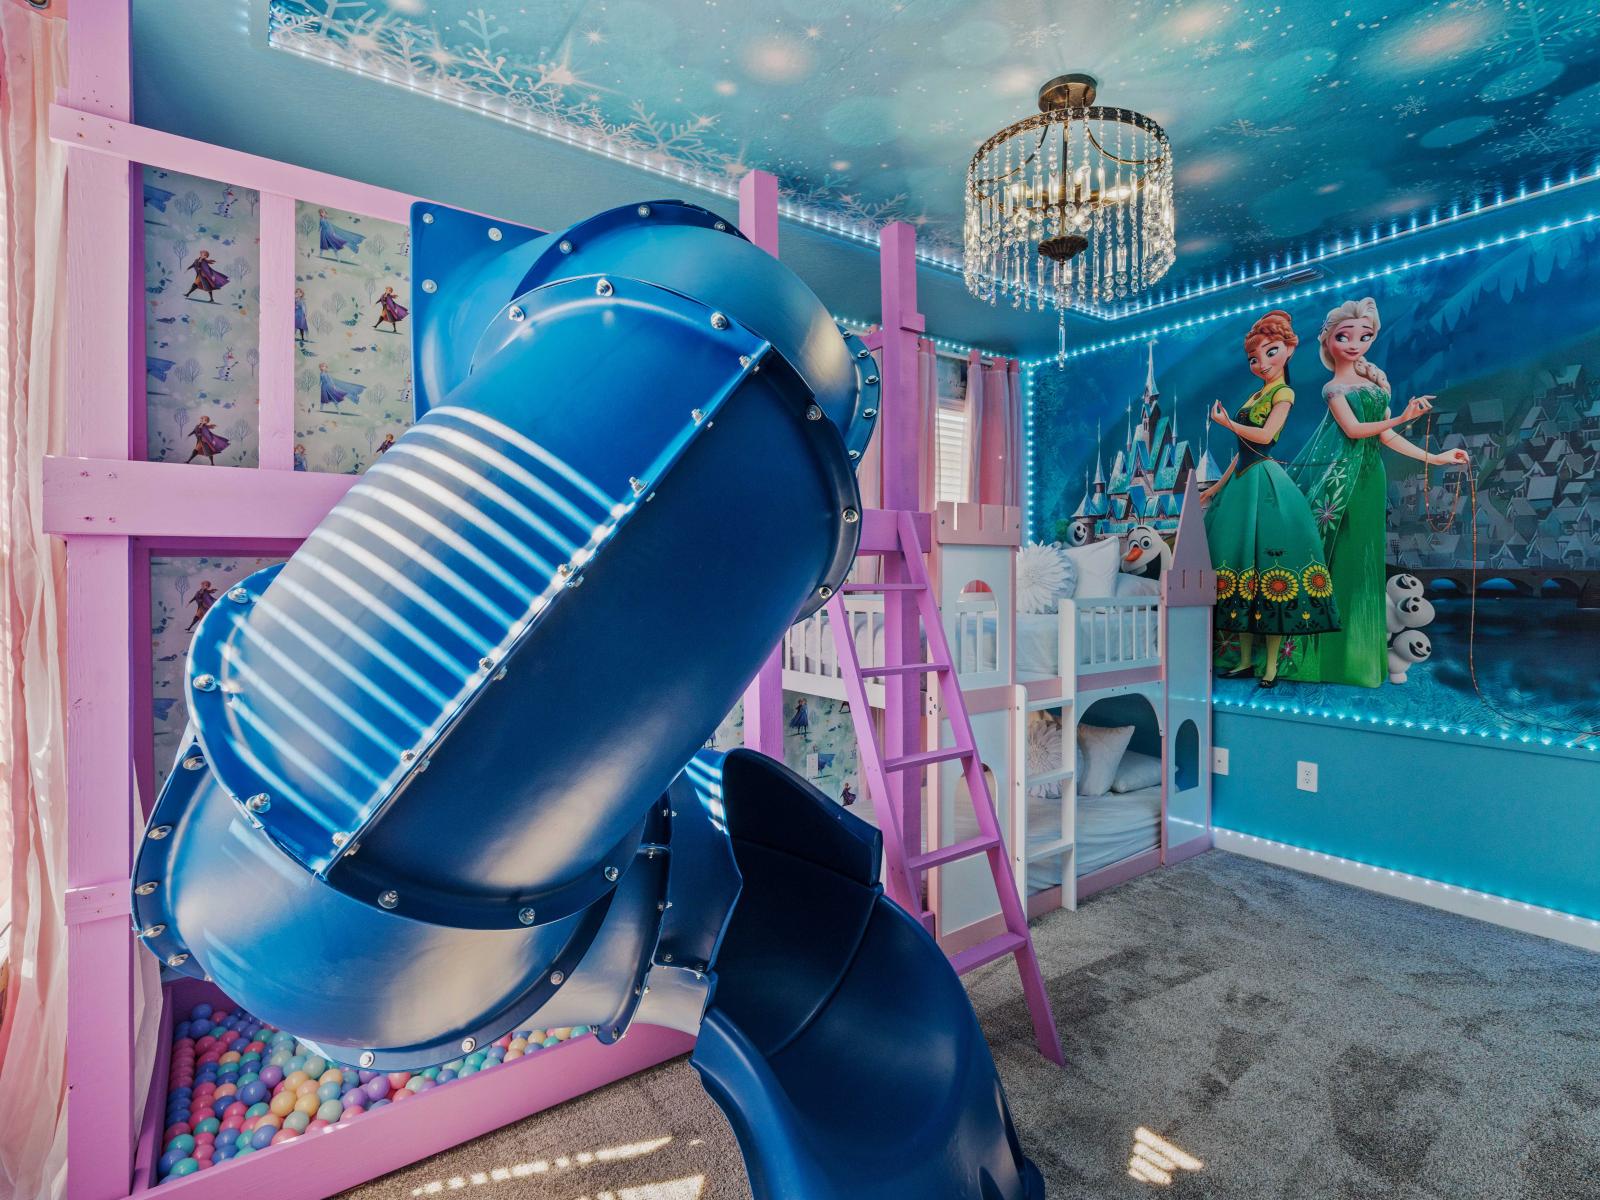 Lush Bedroom of the Home in Davenport Florida - Embark on an adventure through Arendelle in Frozen-themed bedroom - Featuring bunk beds and a slide that promise excitement